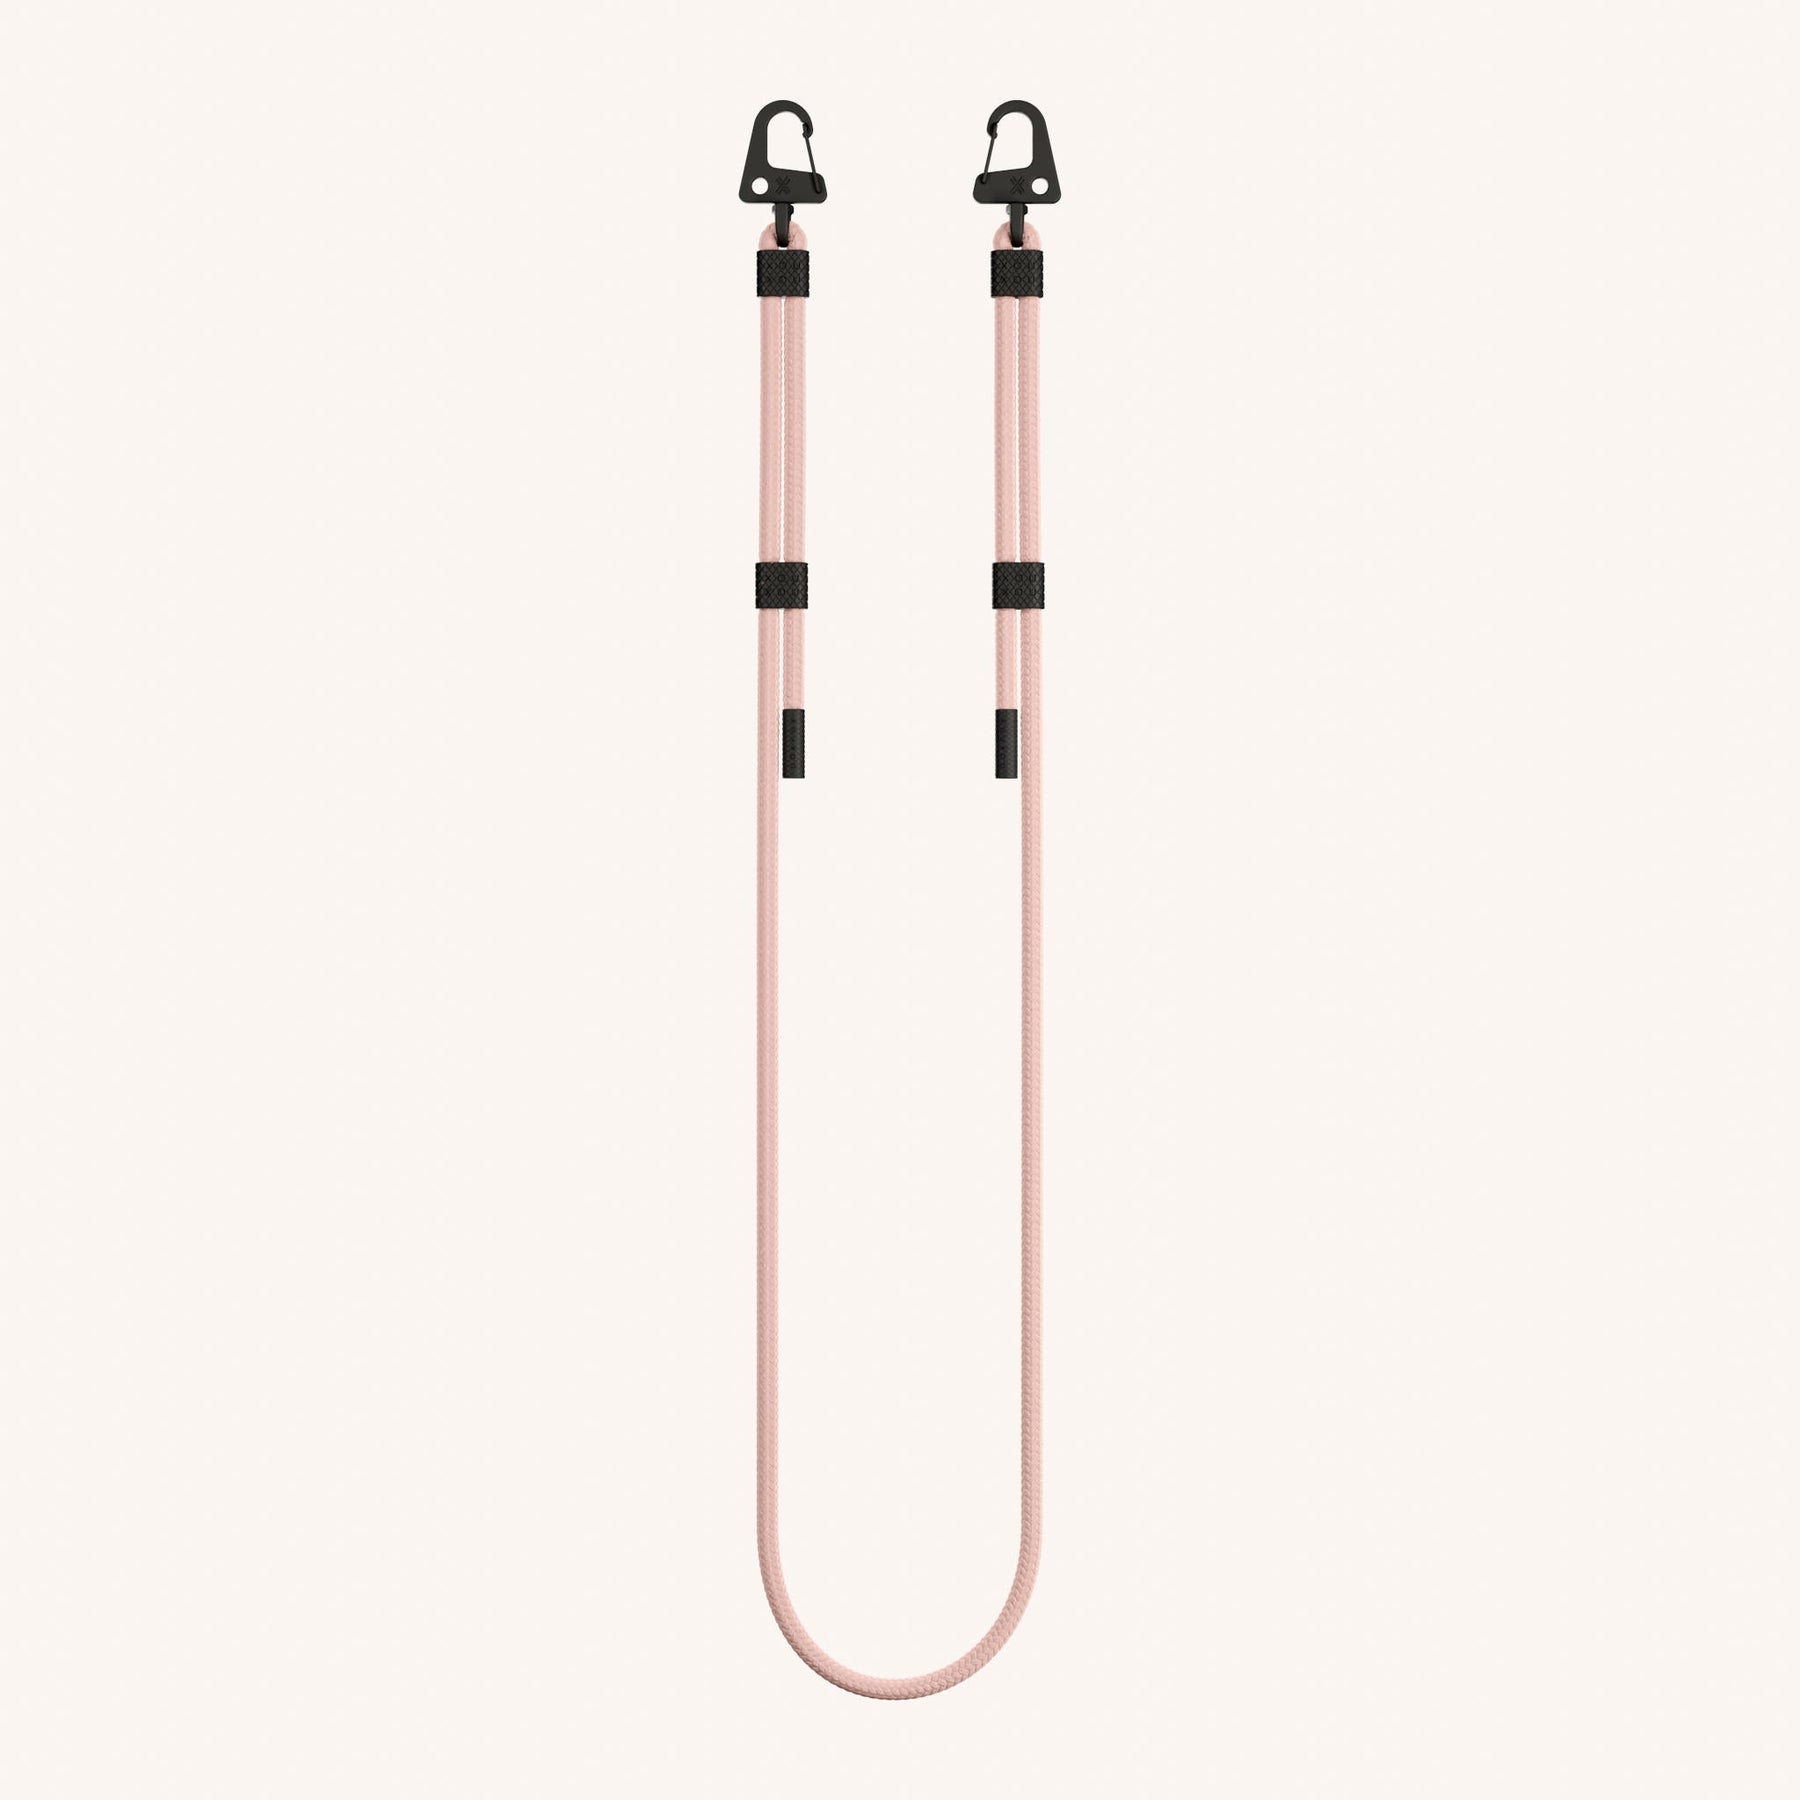 Phone Strap Carabiner Rope in Powder Pink Total View | XOUXOU